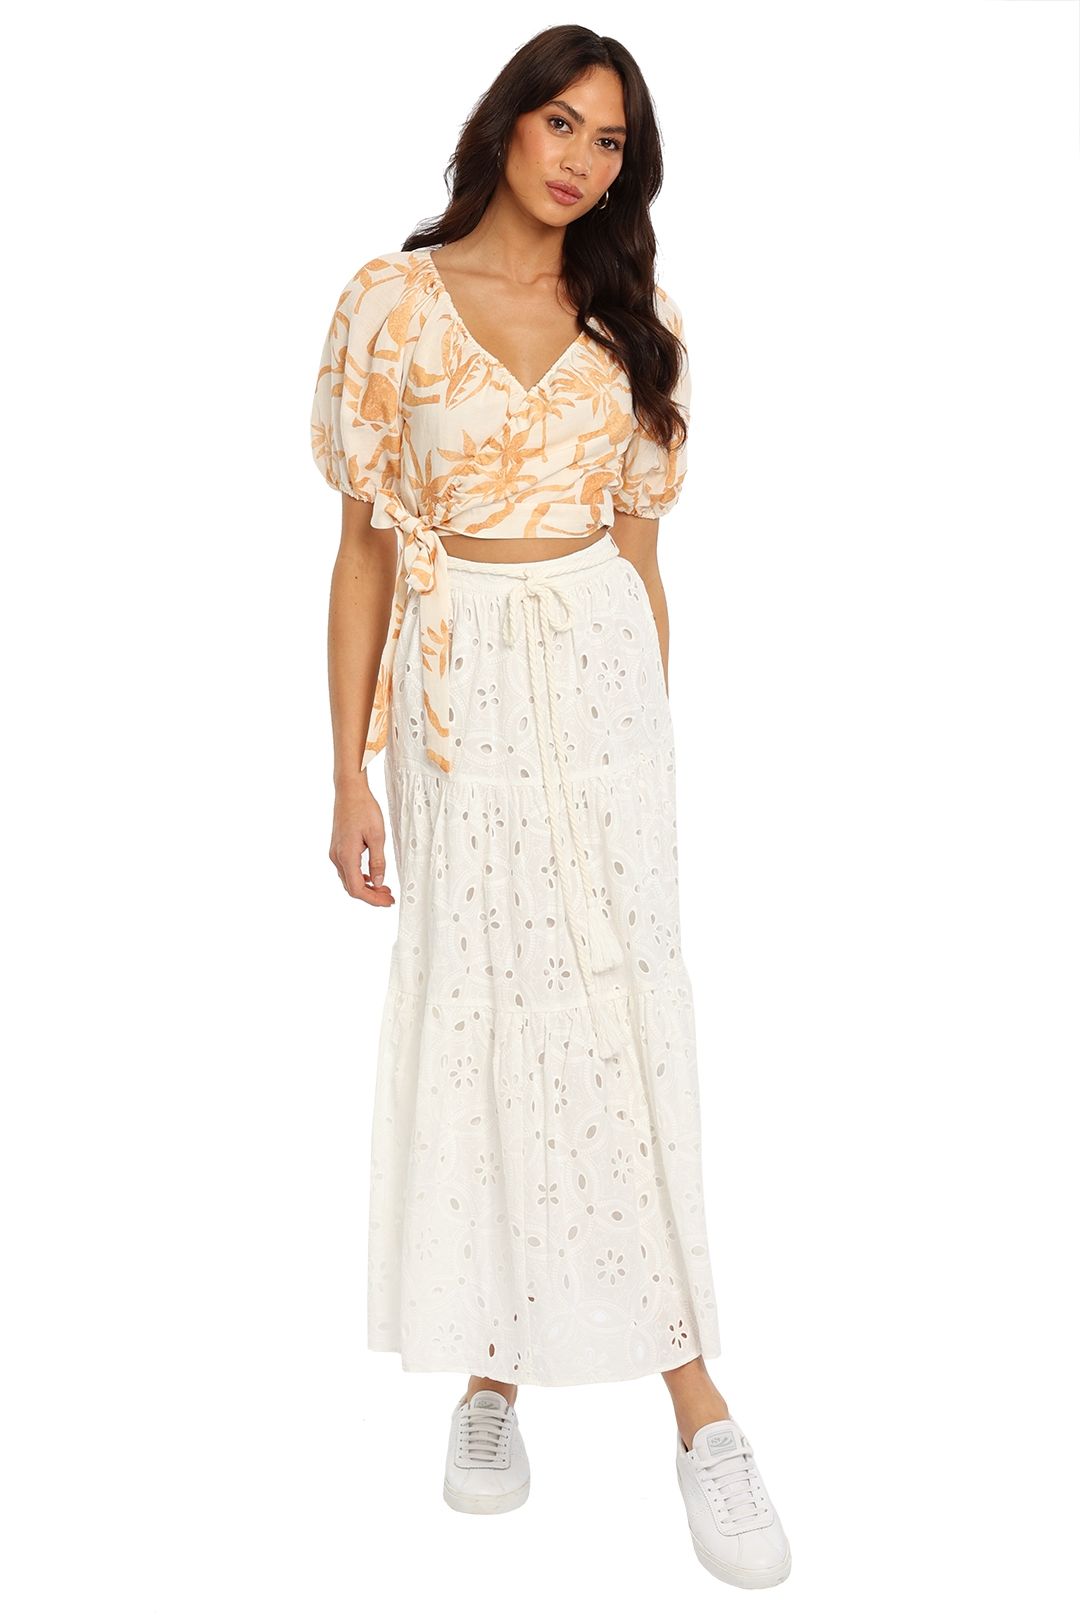 Ministry of Style Modern Romantic Maxi Skirt lace